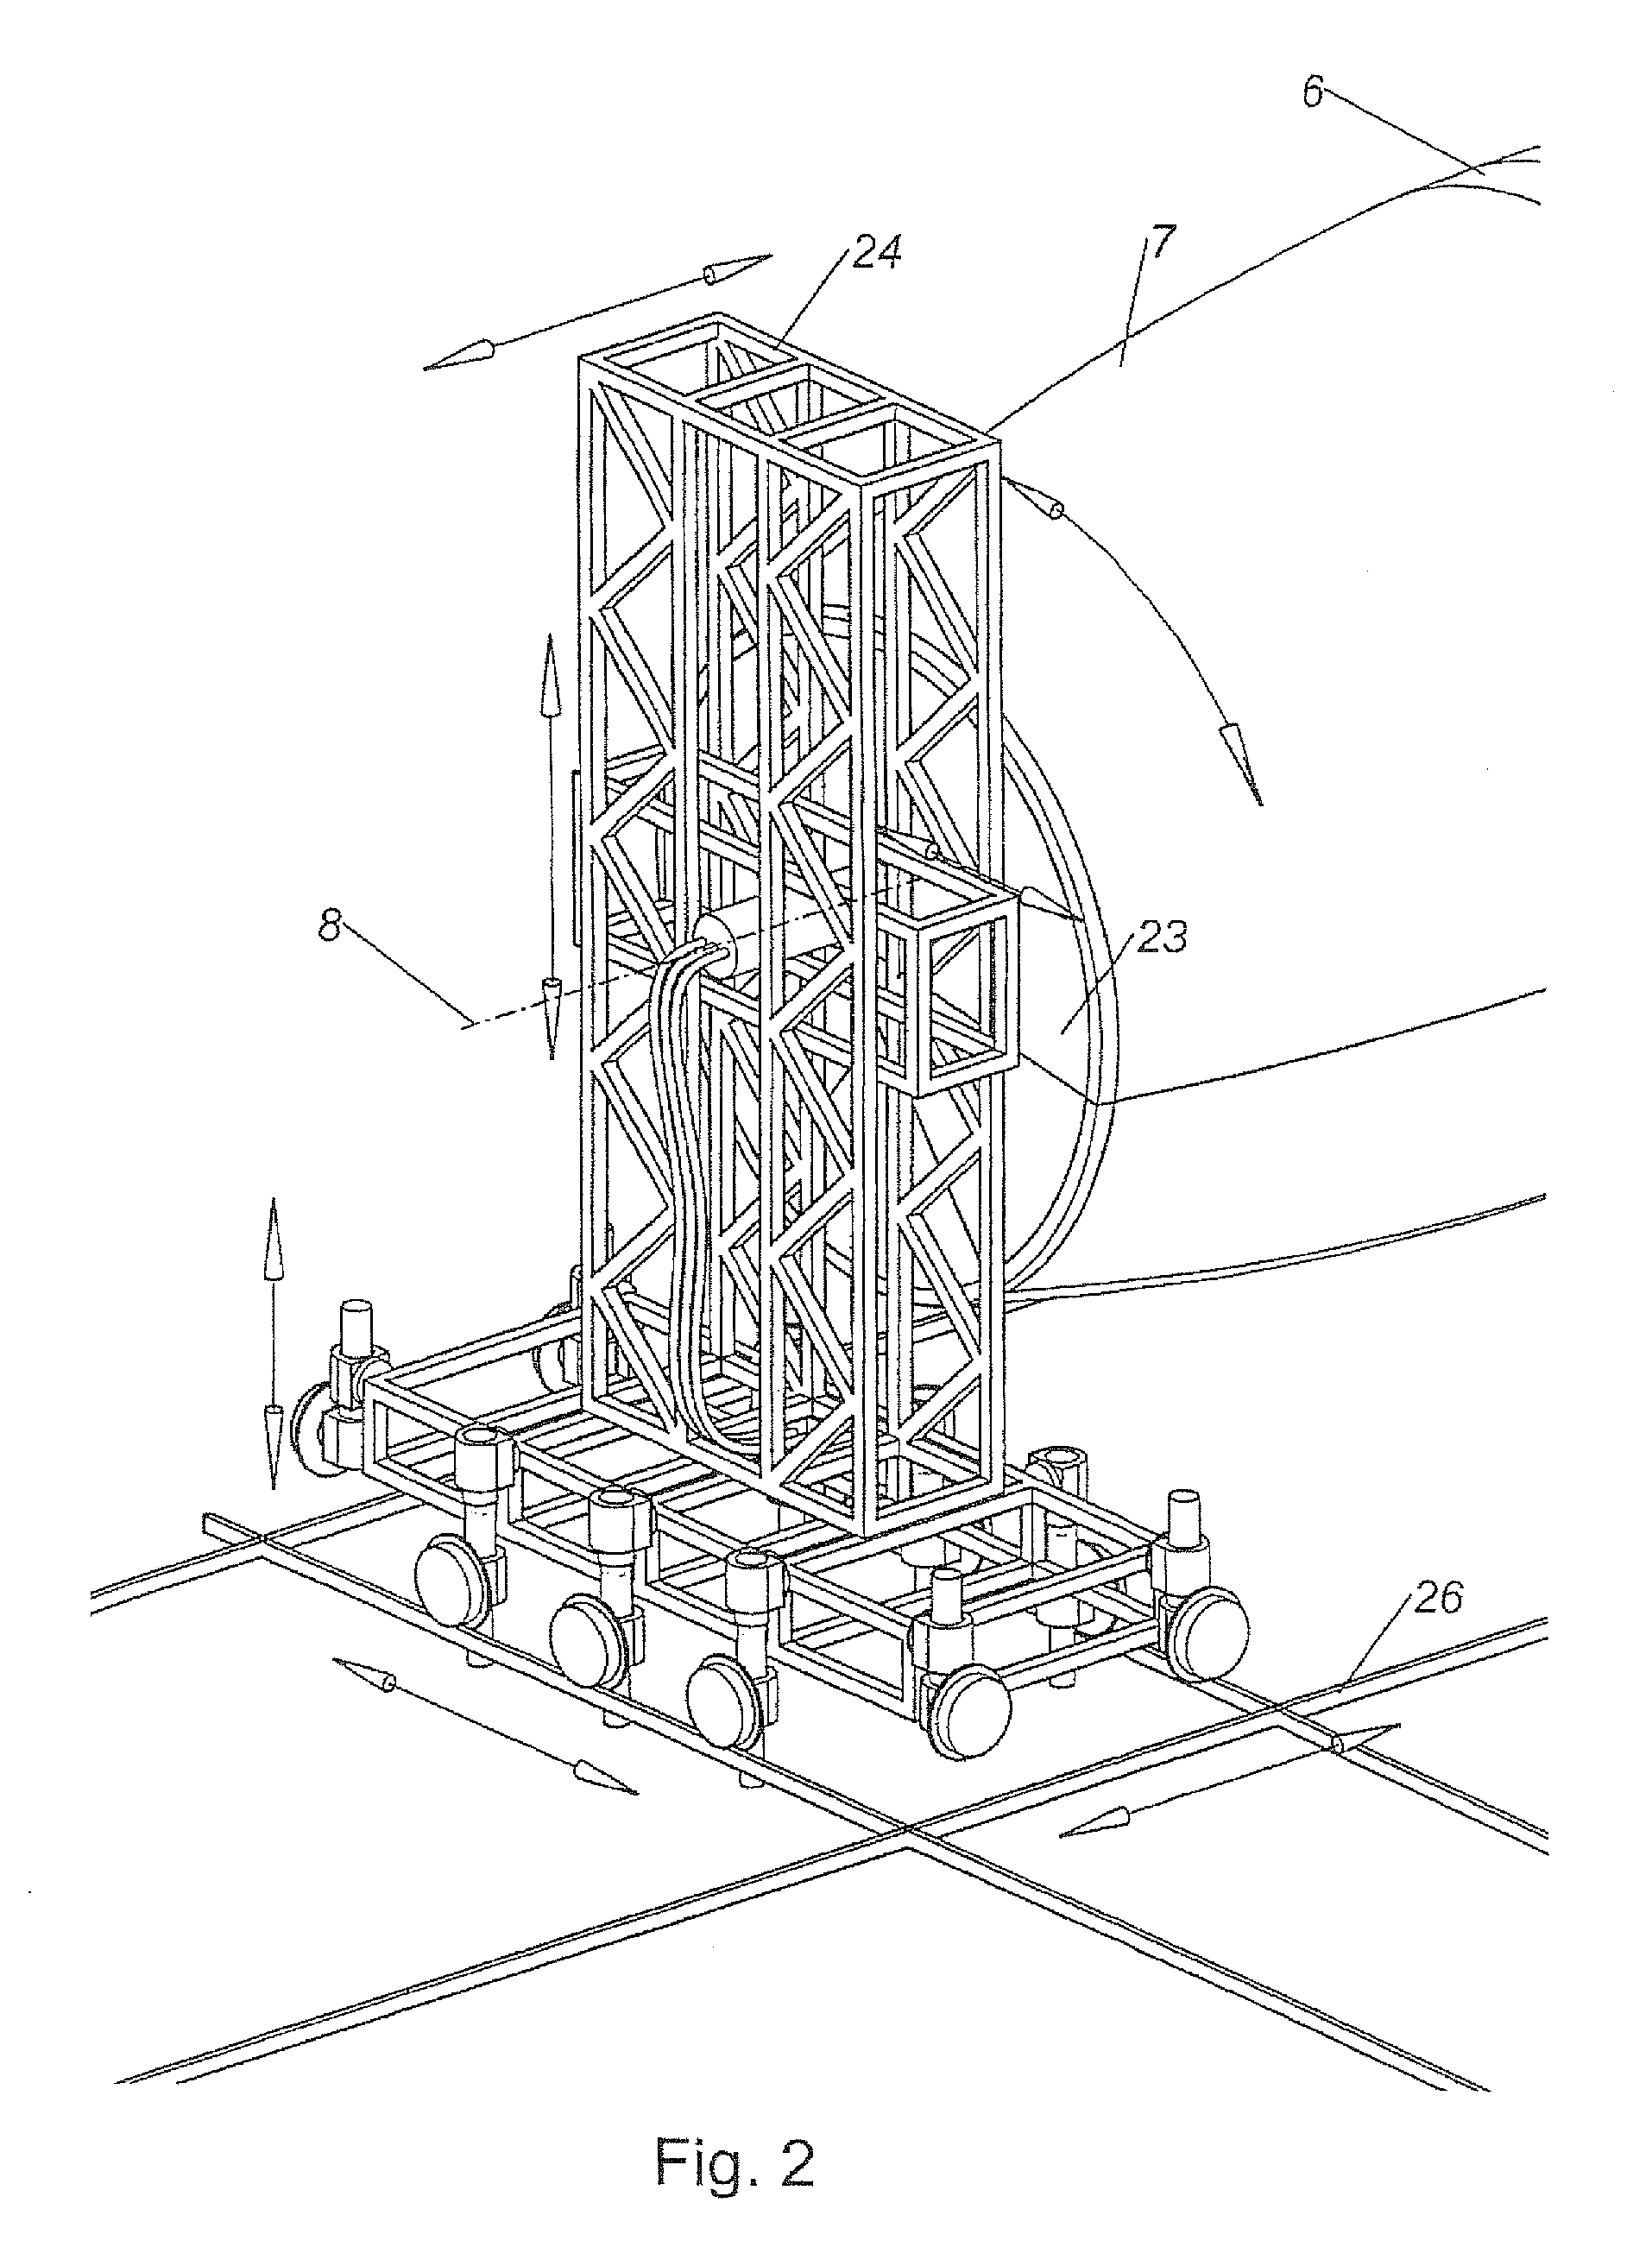 Method for producing a hollow body